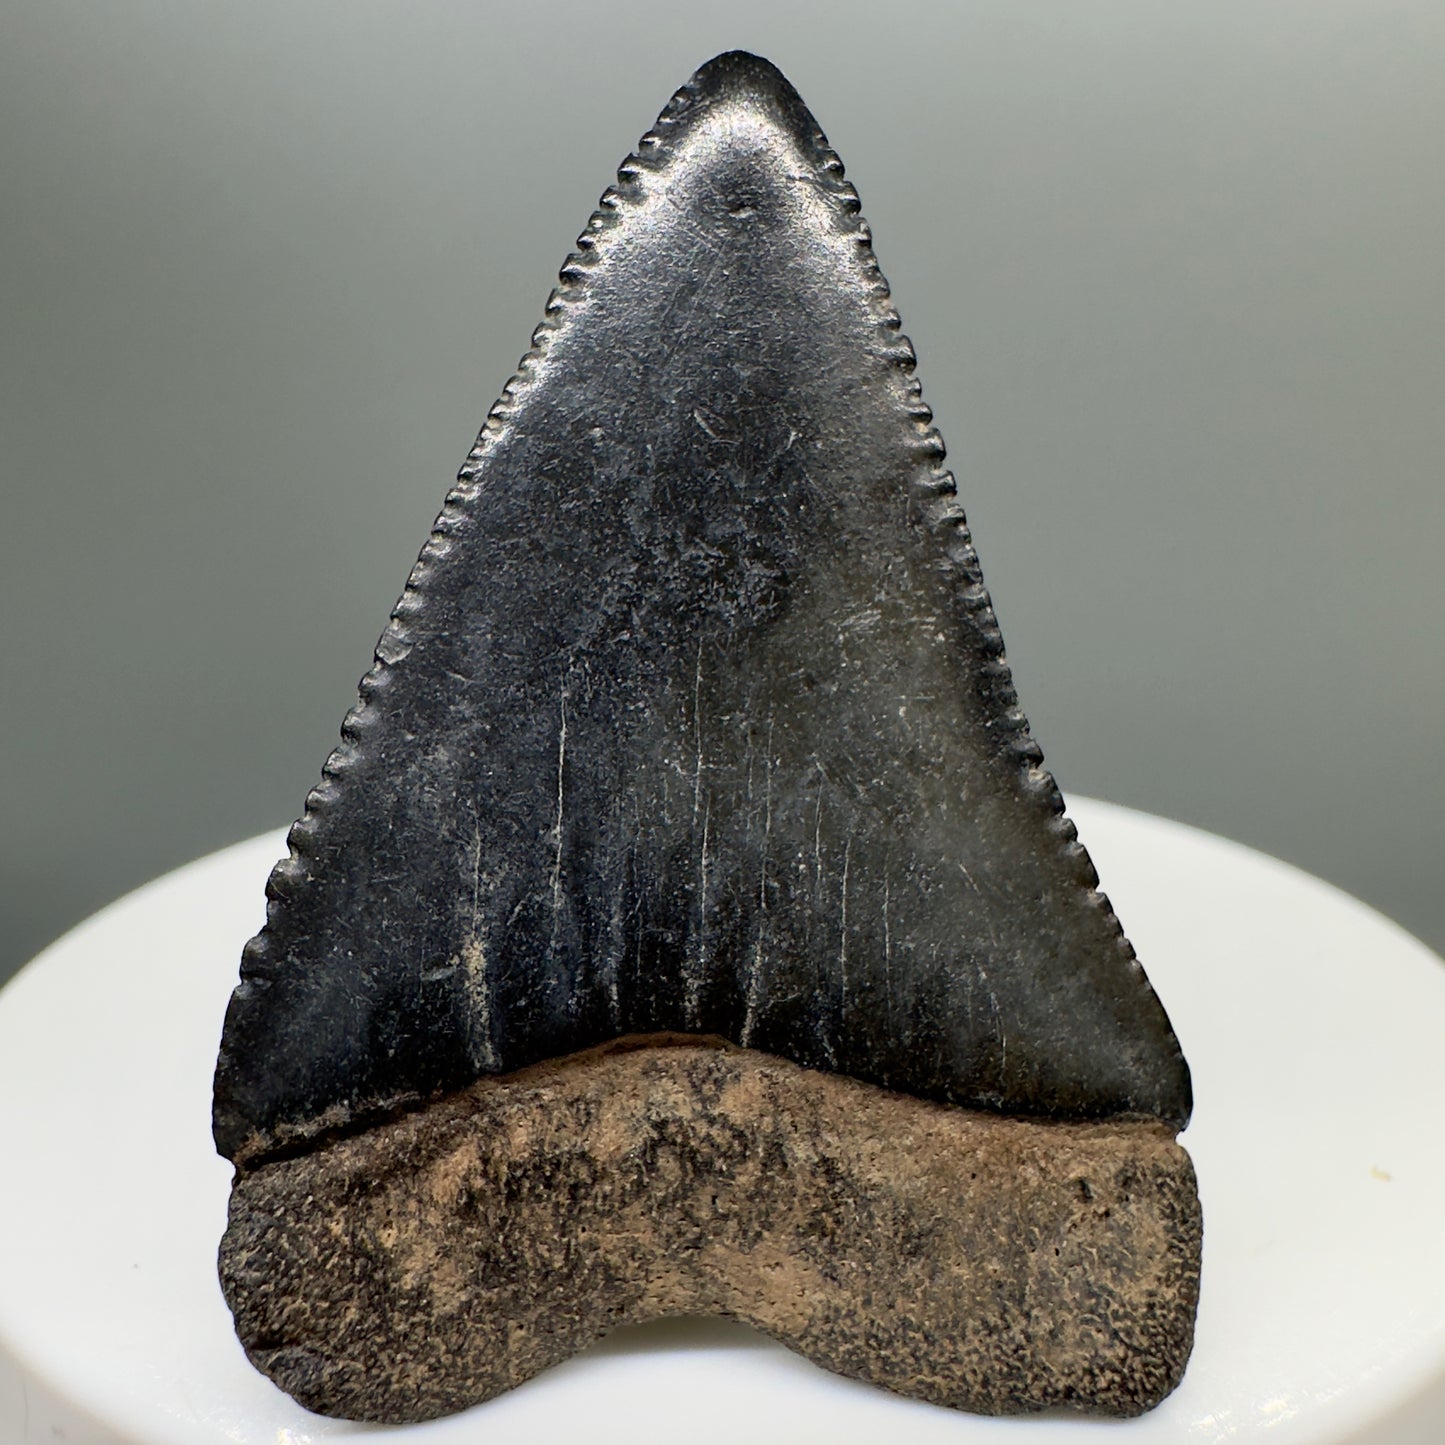 Colorful, sharply serrated 1.63" Fossil Great White Shark Tooth - South Carolina River GW1093 - Back